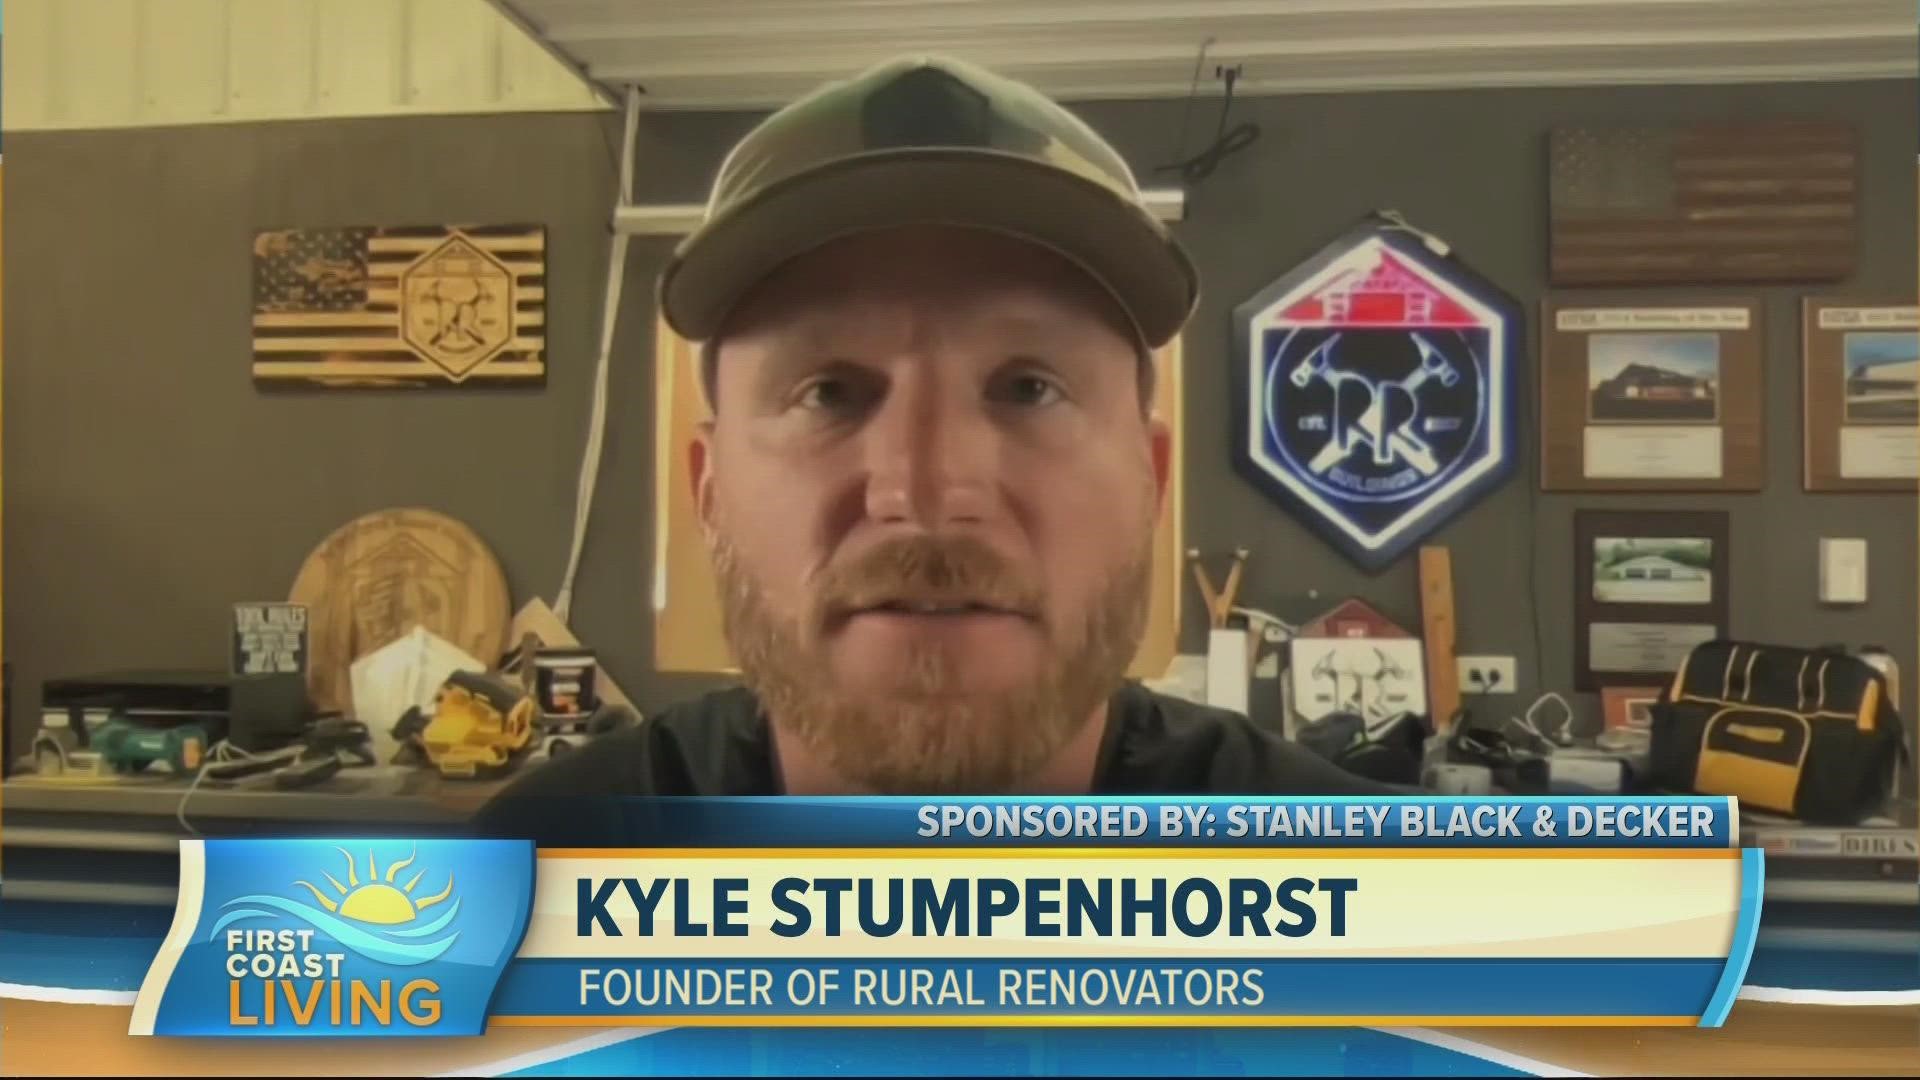 Tradesman Kyle Stumpenhorst kicks off Maker Month shining light on the trades and why "Empower Makers" Global Impact Challenge is important.